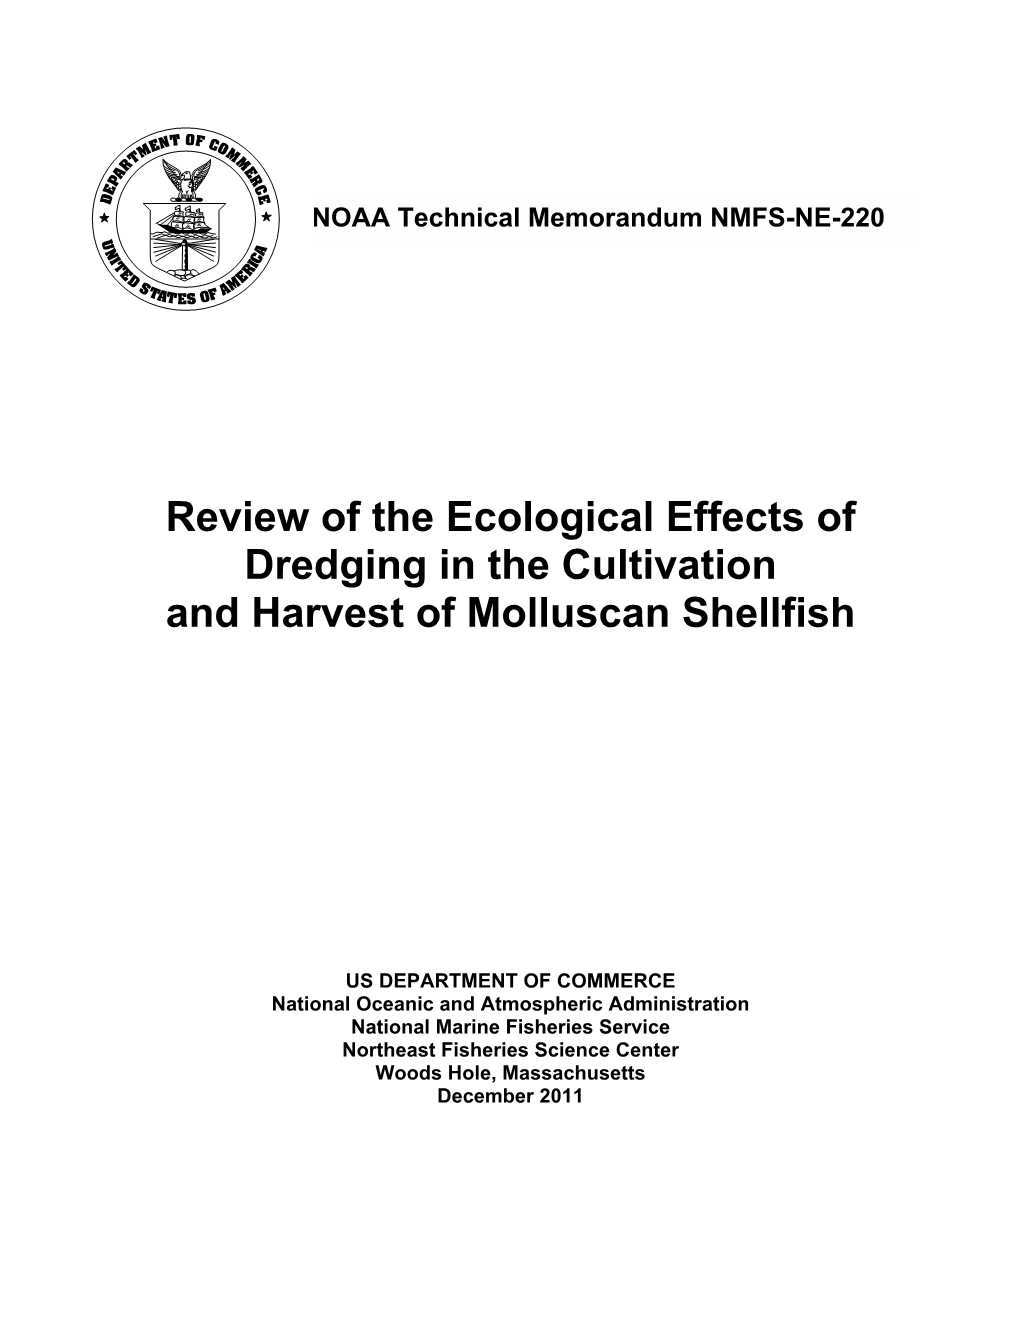 Review of the Ecological Effects of Dredging in the Cultivation and Harvest of Molluscan Shellfish